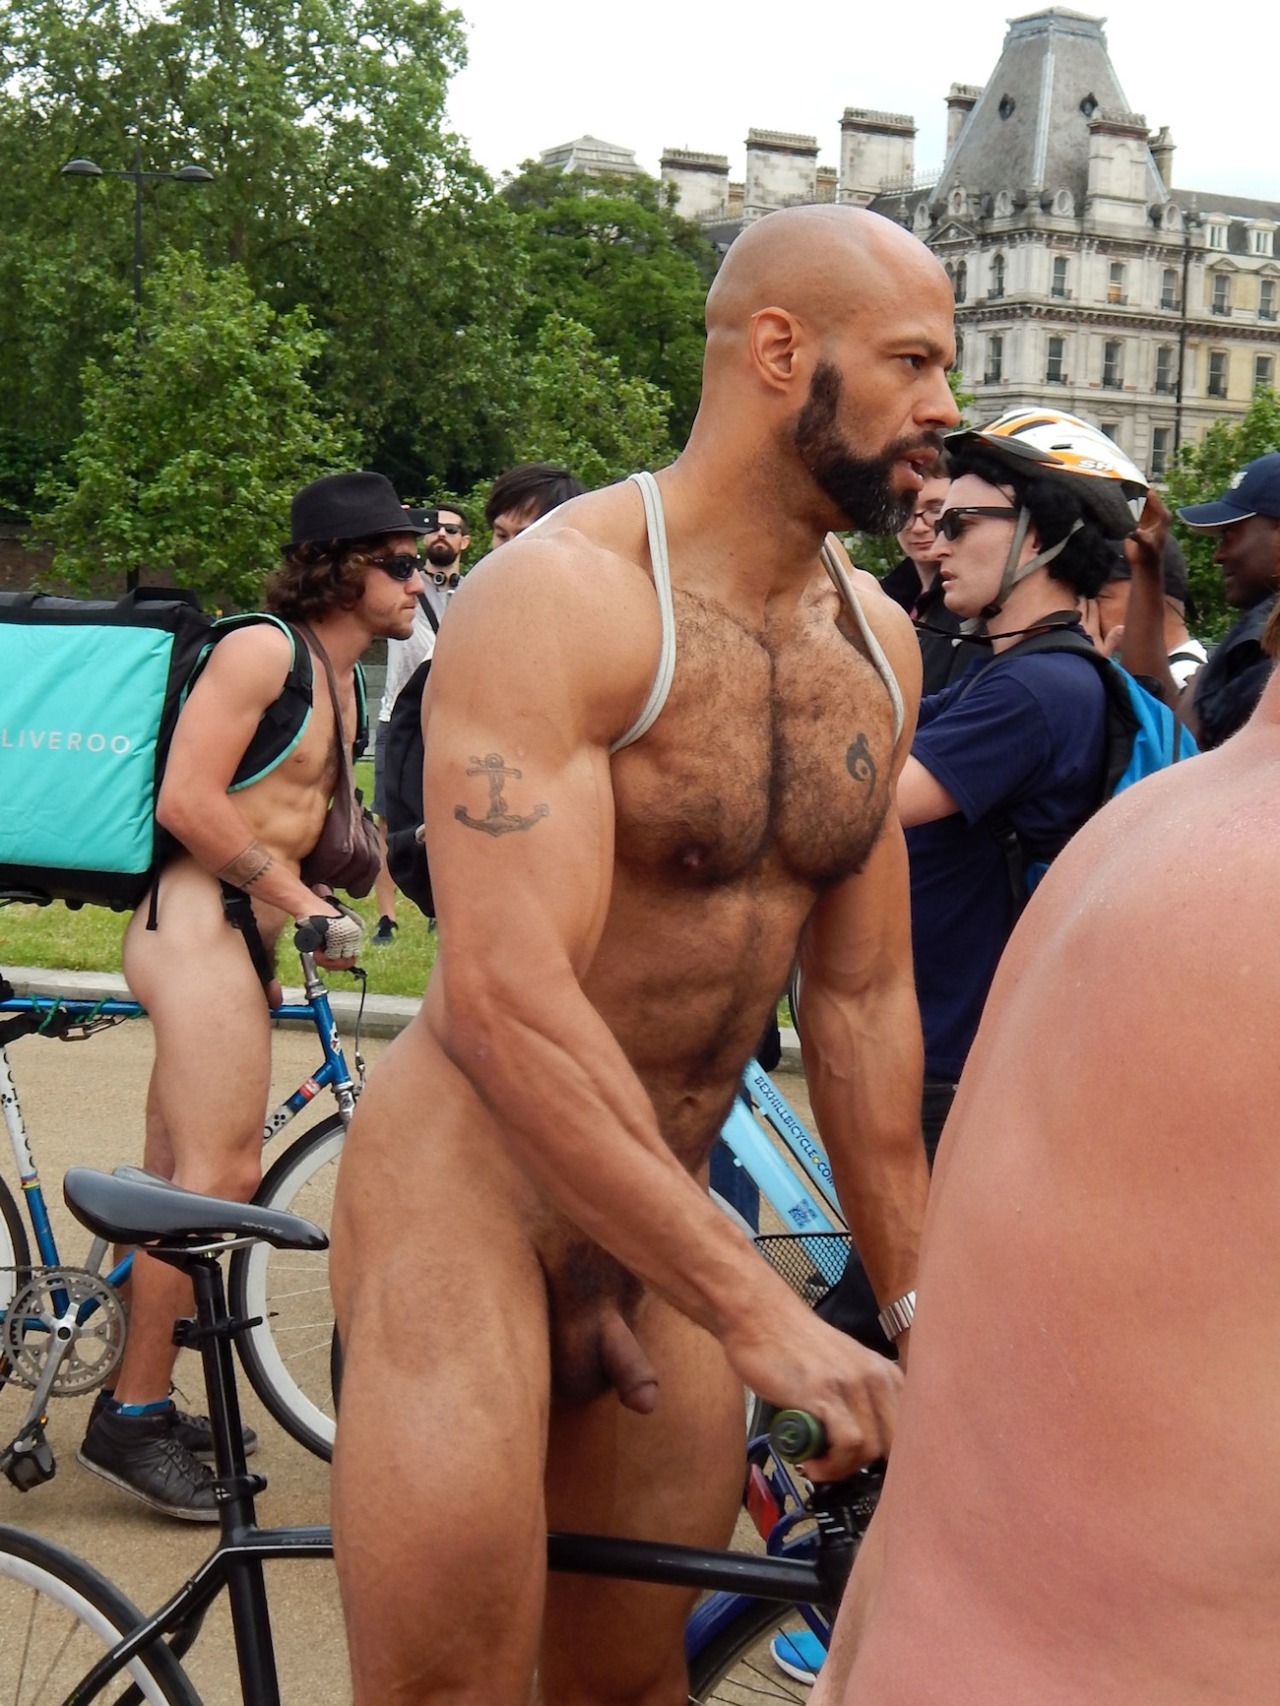 Follow planesdrifter: trueTHAT if you’re an admirer of older, hairy natural and muscular men.
Check it out and the archive too or the live cams.